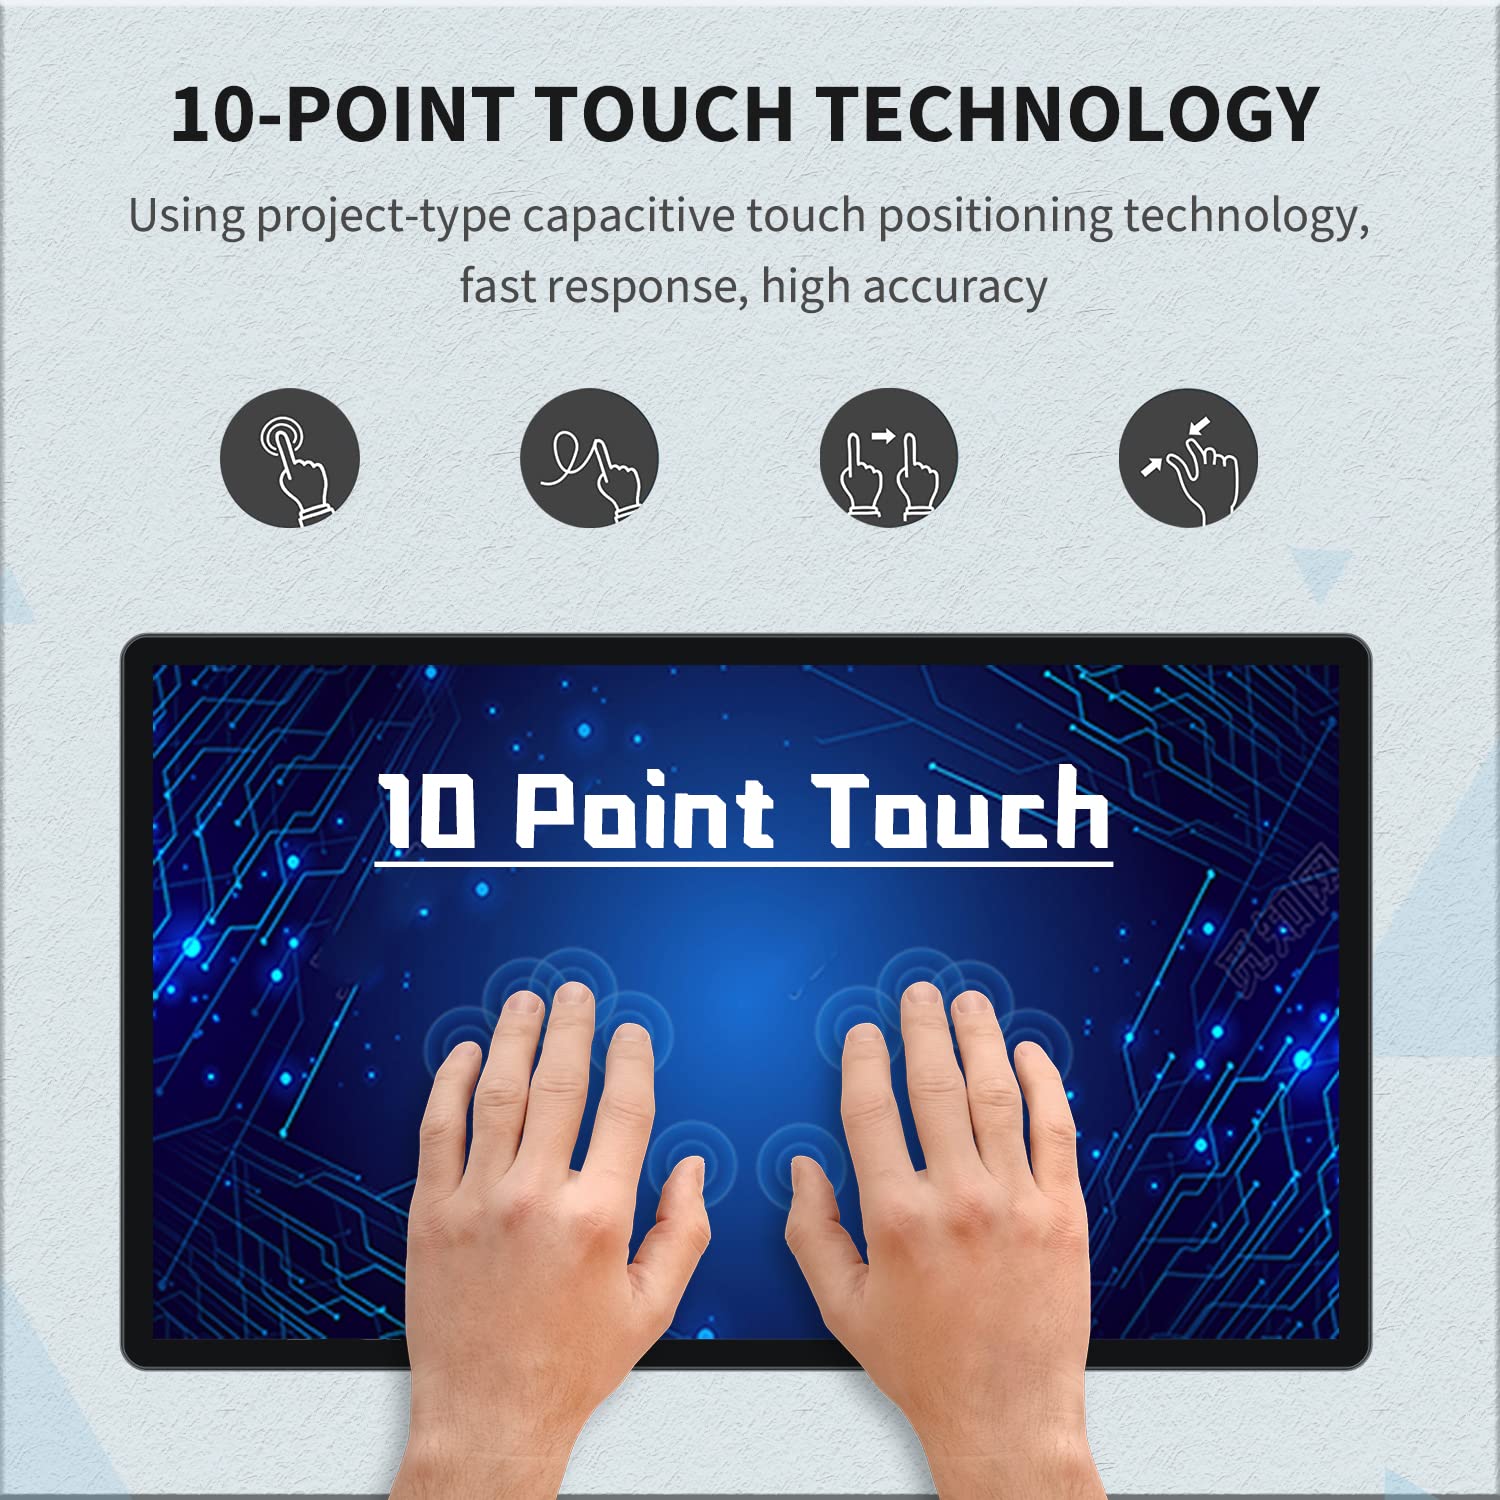 TouchWo 21.5 inch Touch Screen All-in-One Industrial PC, i3, 4GB RAM, 128G SSD, 16:9 FHD 1080P, Windows 10, Smart Board for Classroom, Meeting & Game, USB, VGA & HDMI Monitor